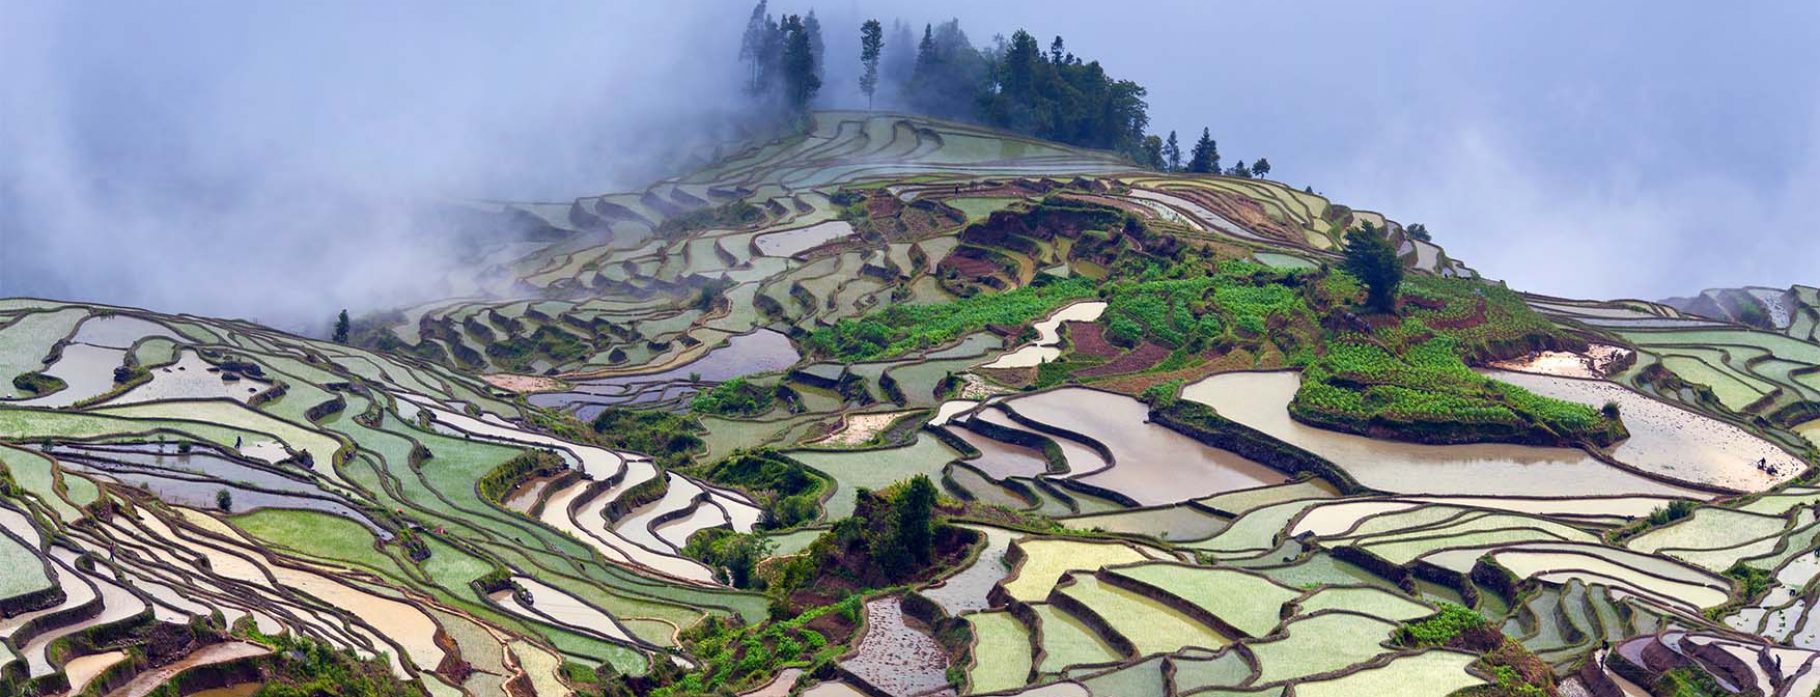 7  DAYS MARVEL OF YUANYANG RICE TERRACES